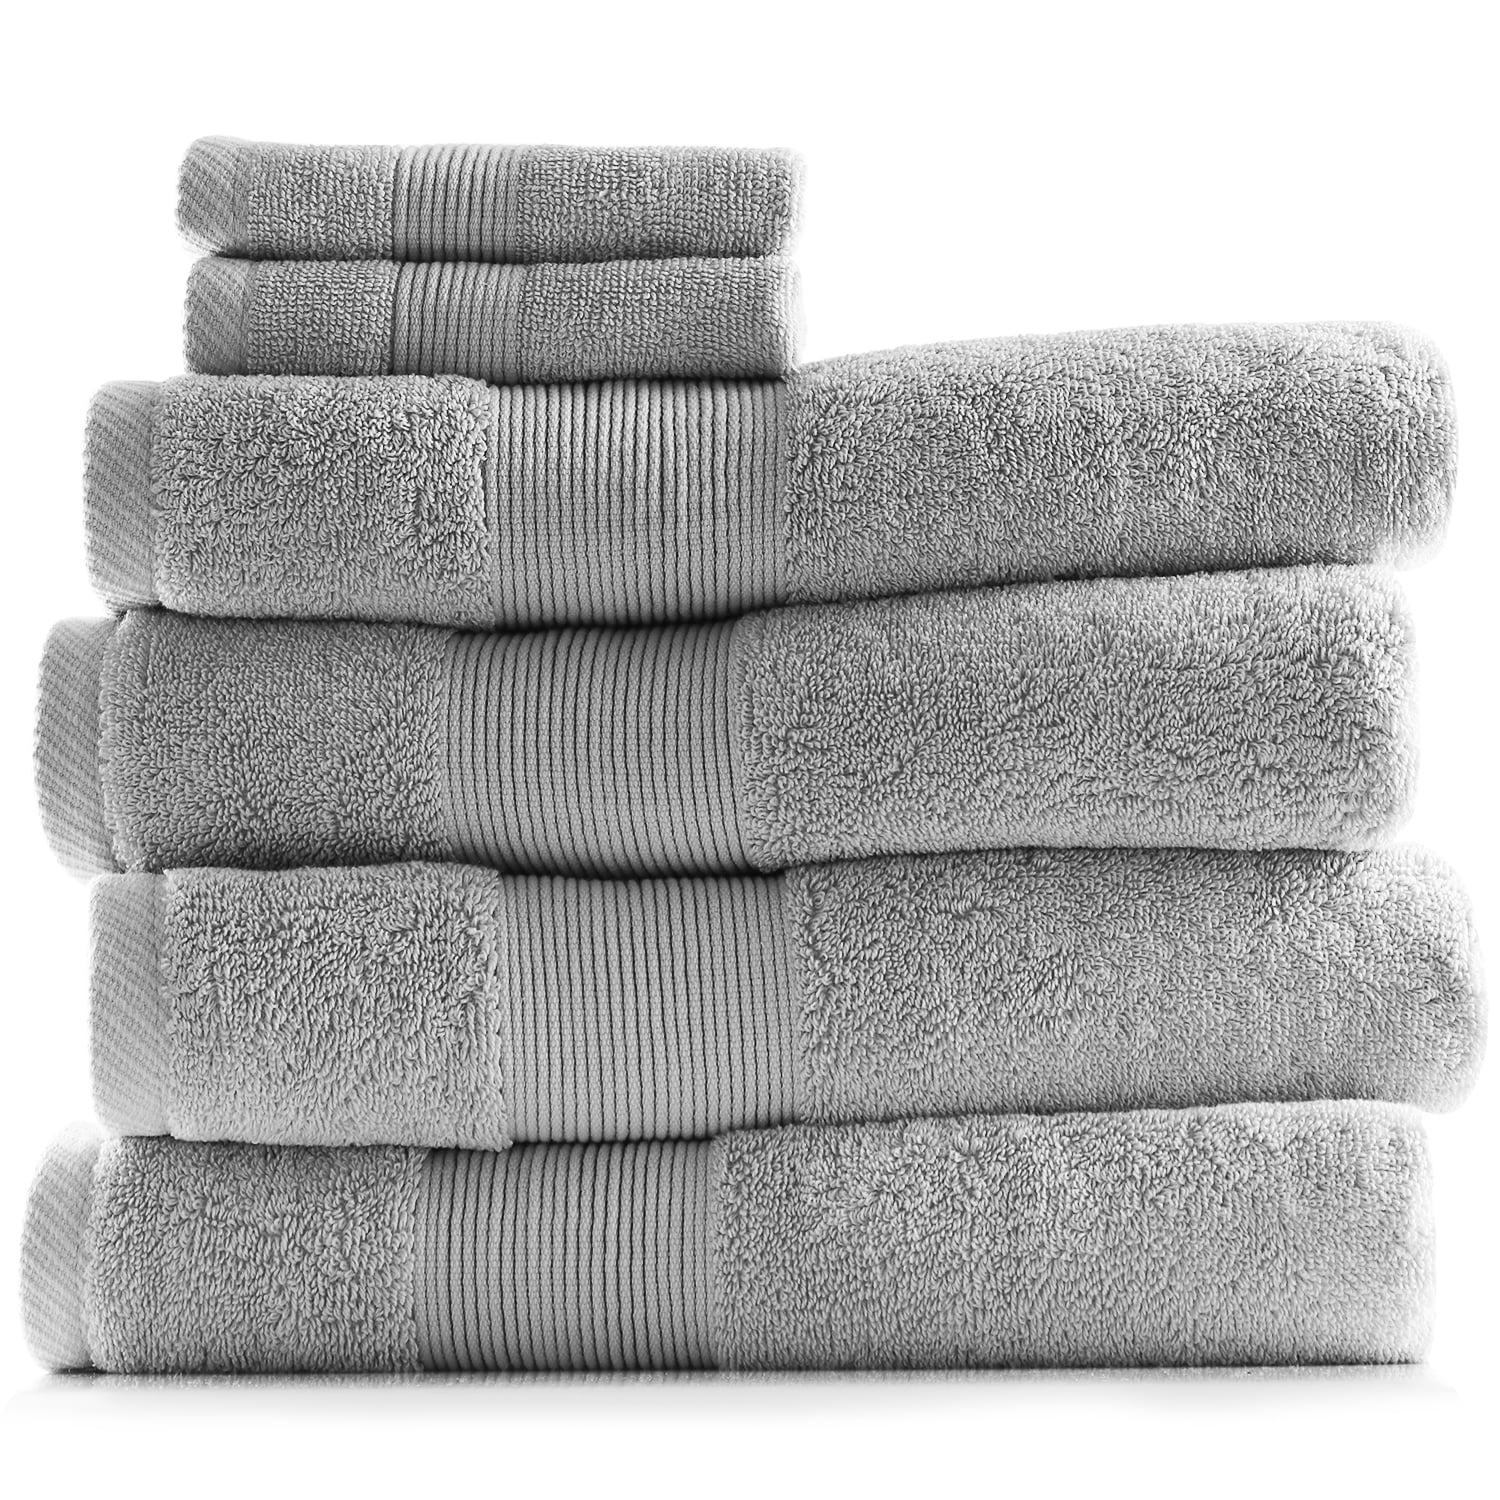 2 X STRIPED BRIGHT 100% COMBED COTTON SOFT ABSORBANT BLACK GREY HAND TOWELS 